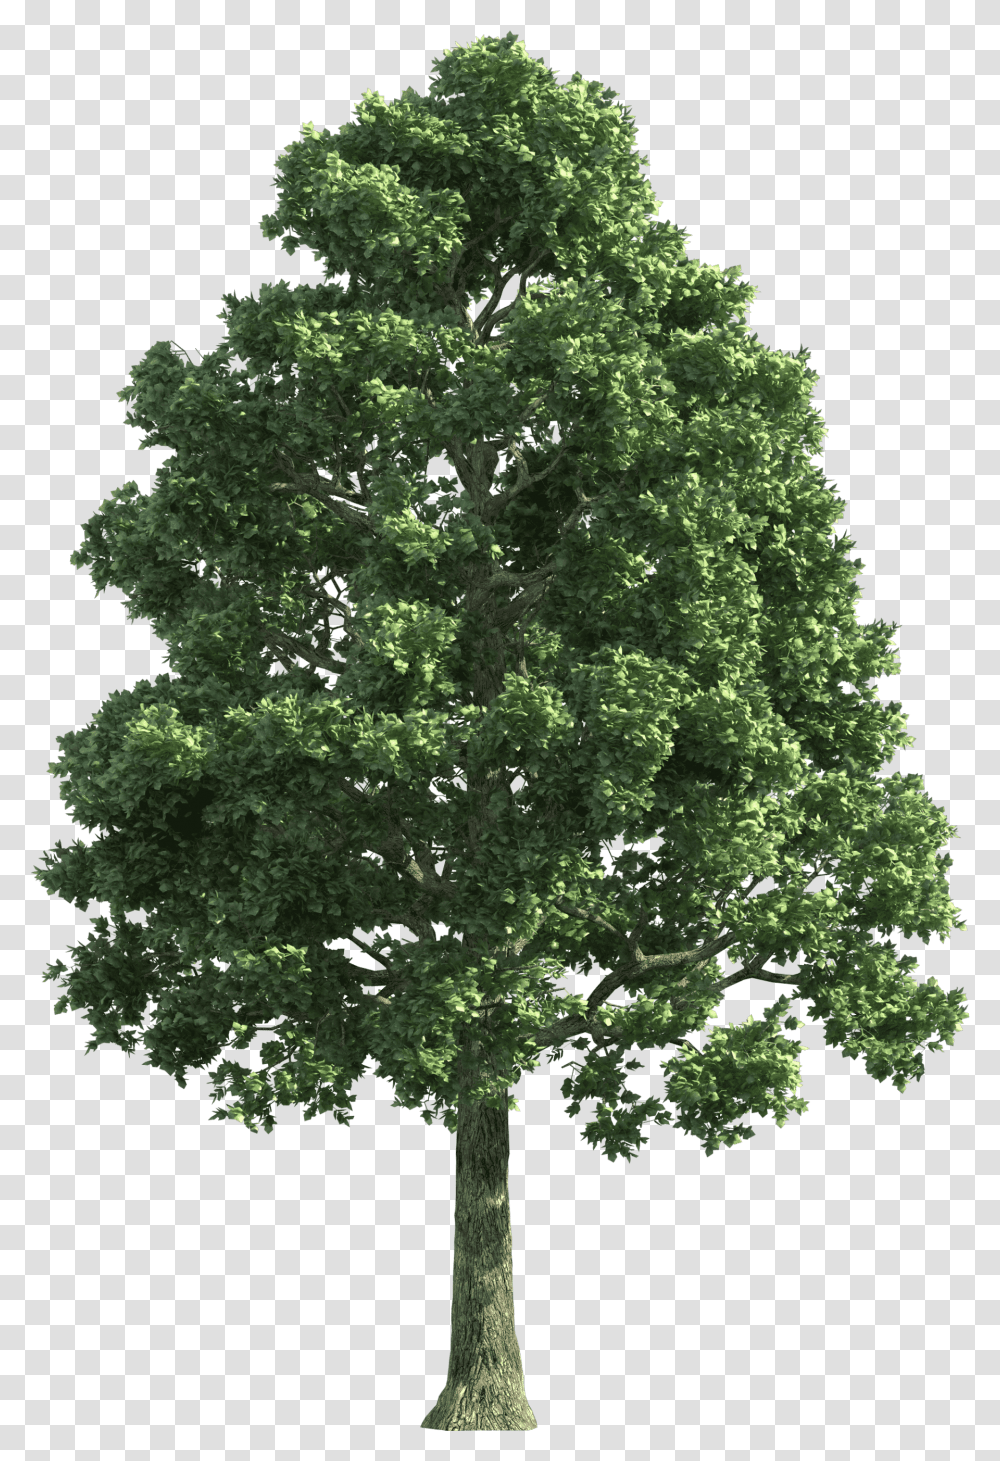 Green Realistic Tree Clip Art Animated Tree Gif, Plant, Maple, Oak, Leaf Transparent Png